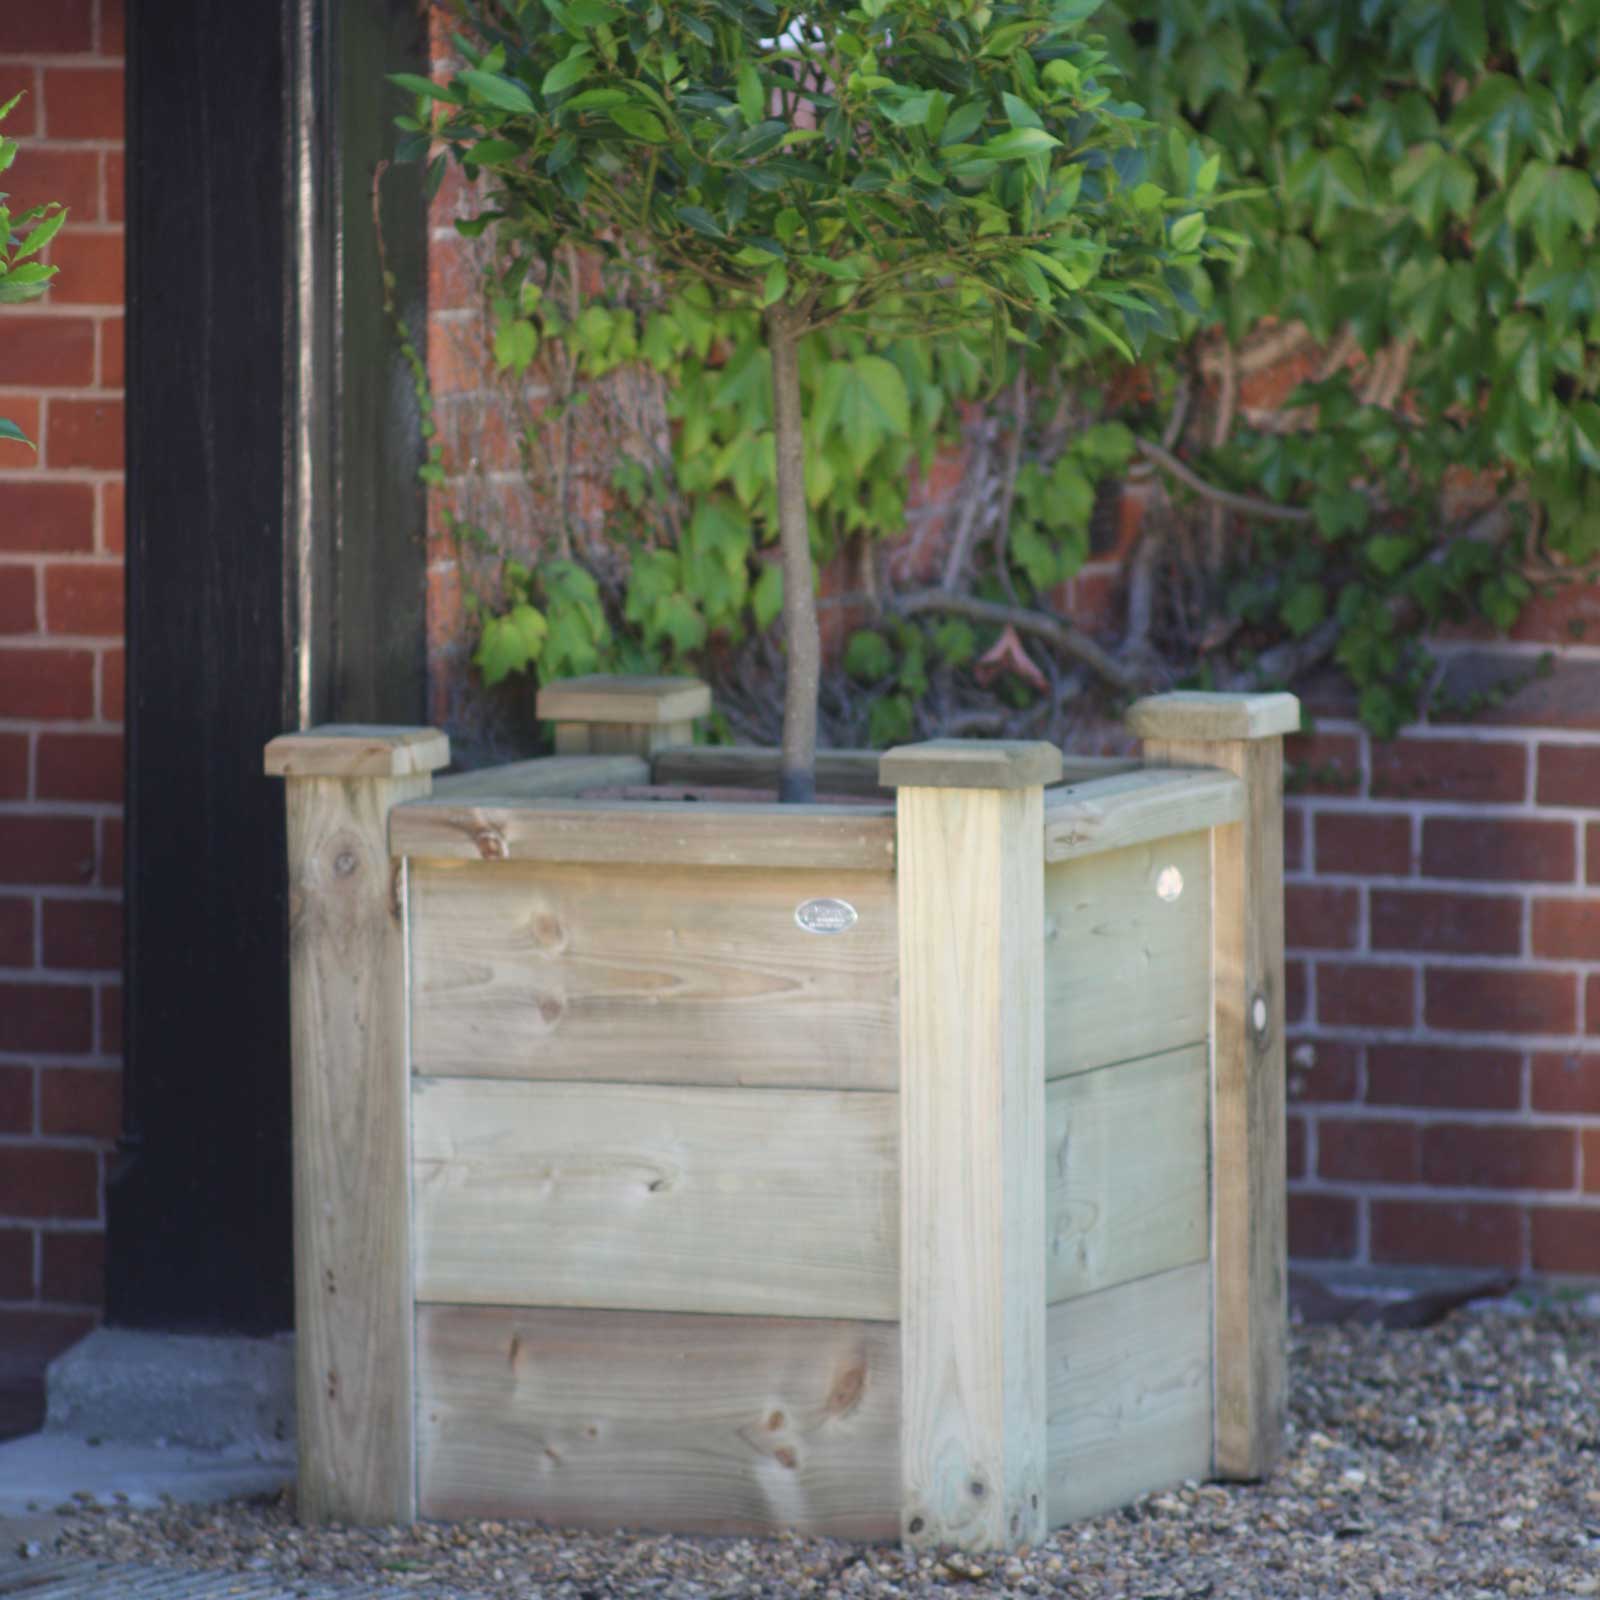 Square Wooden Planters from Harrod Horticultural